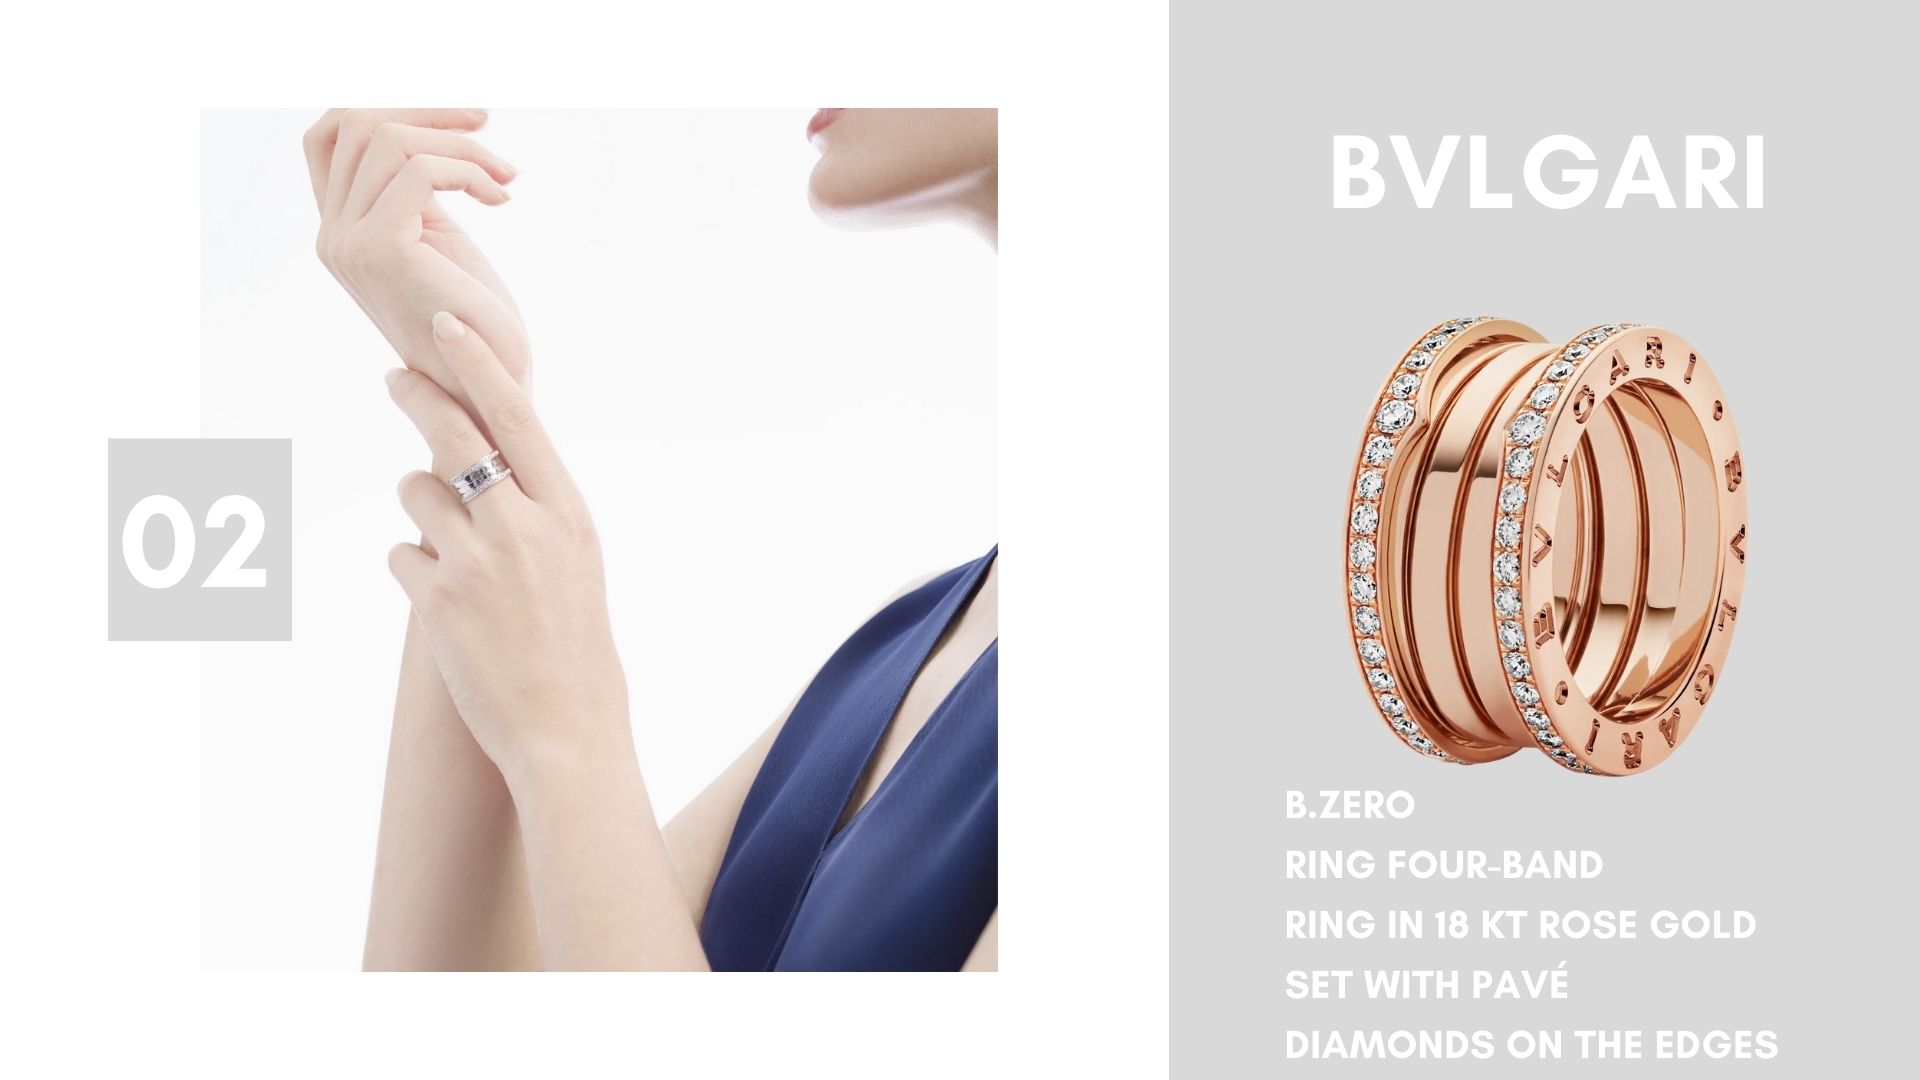 B.zero1 four-band ring in 18 kt rose gold set with pavé diamonds on the edges